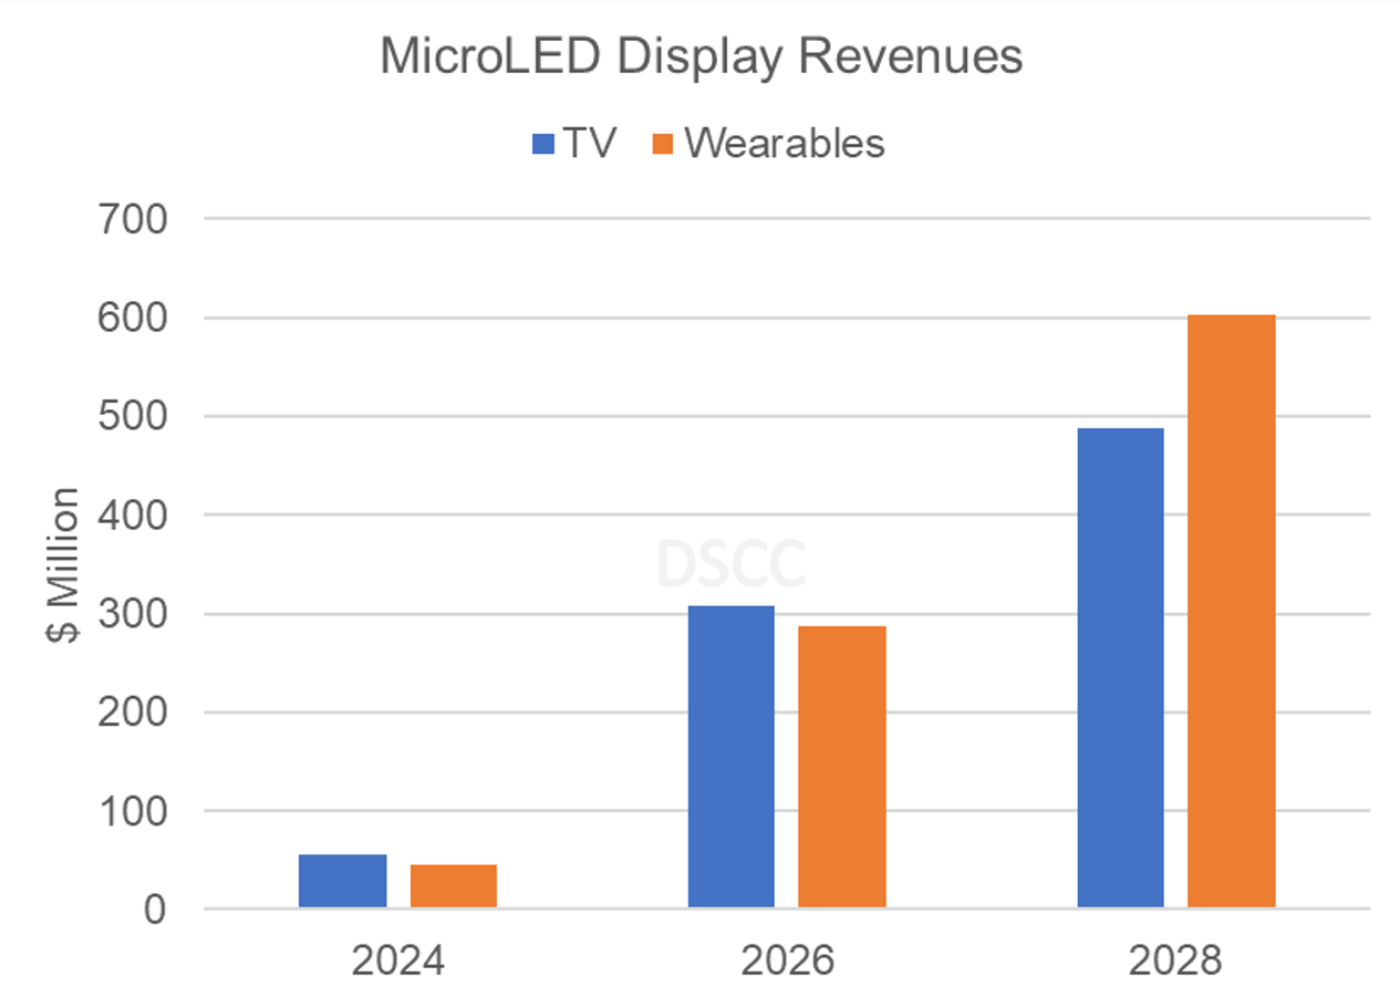 Source: MicroLED Display Technology and Market Outlook Report